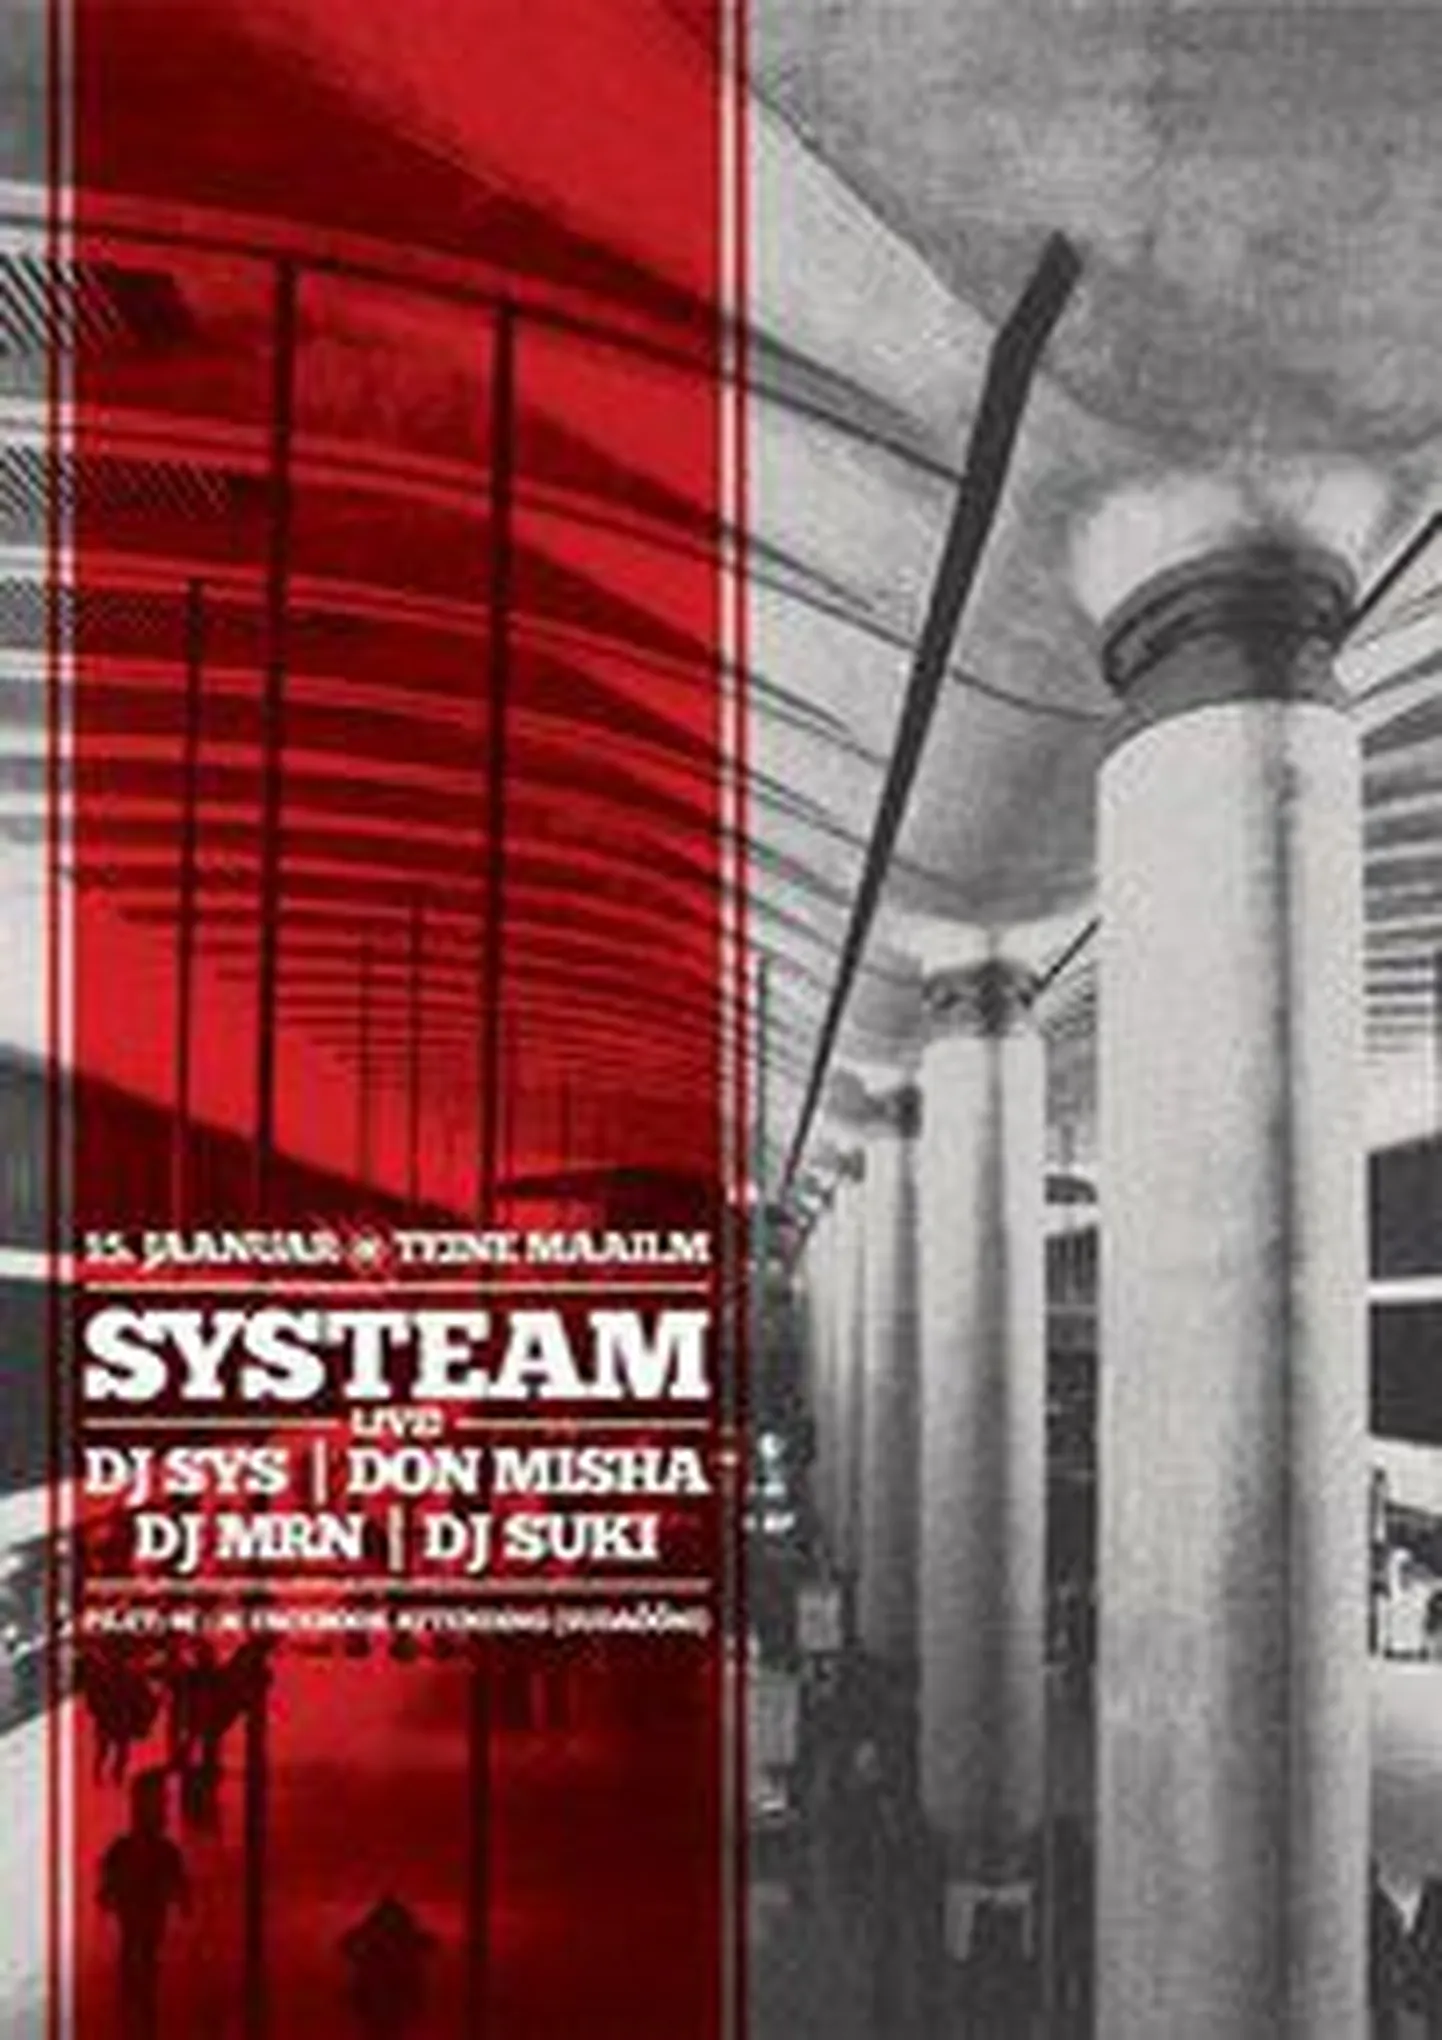 SYSTEAM live